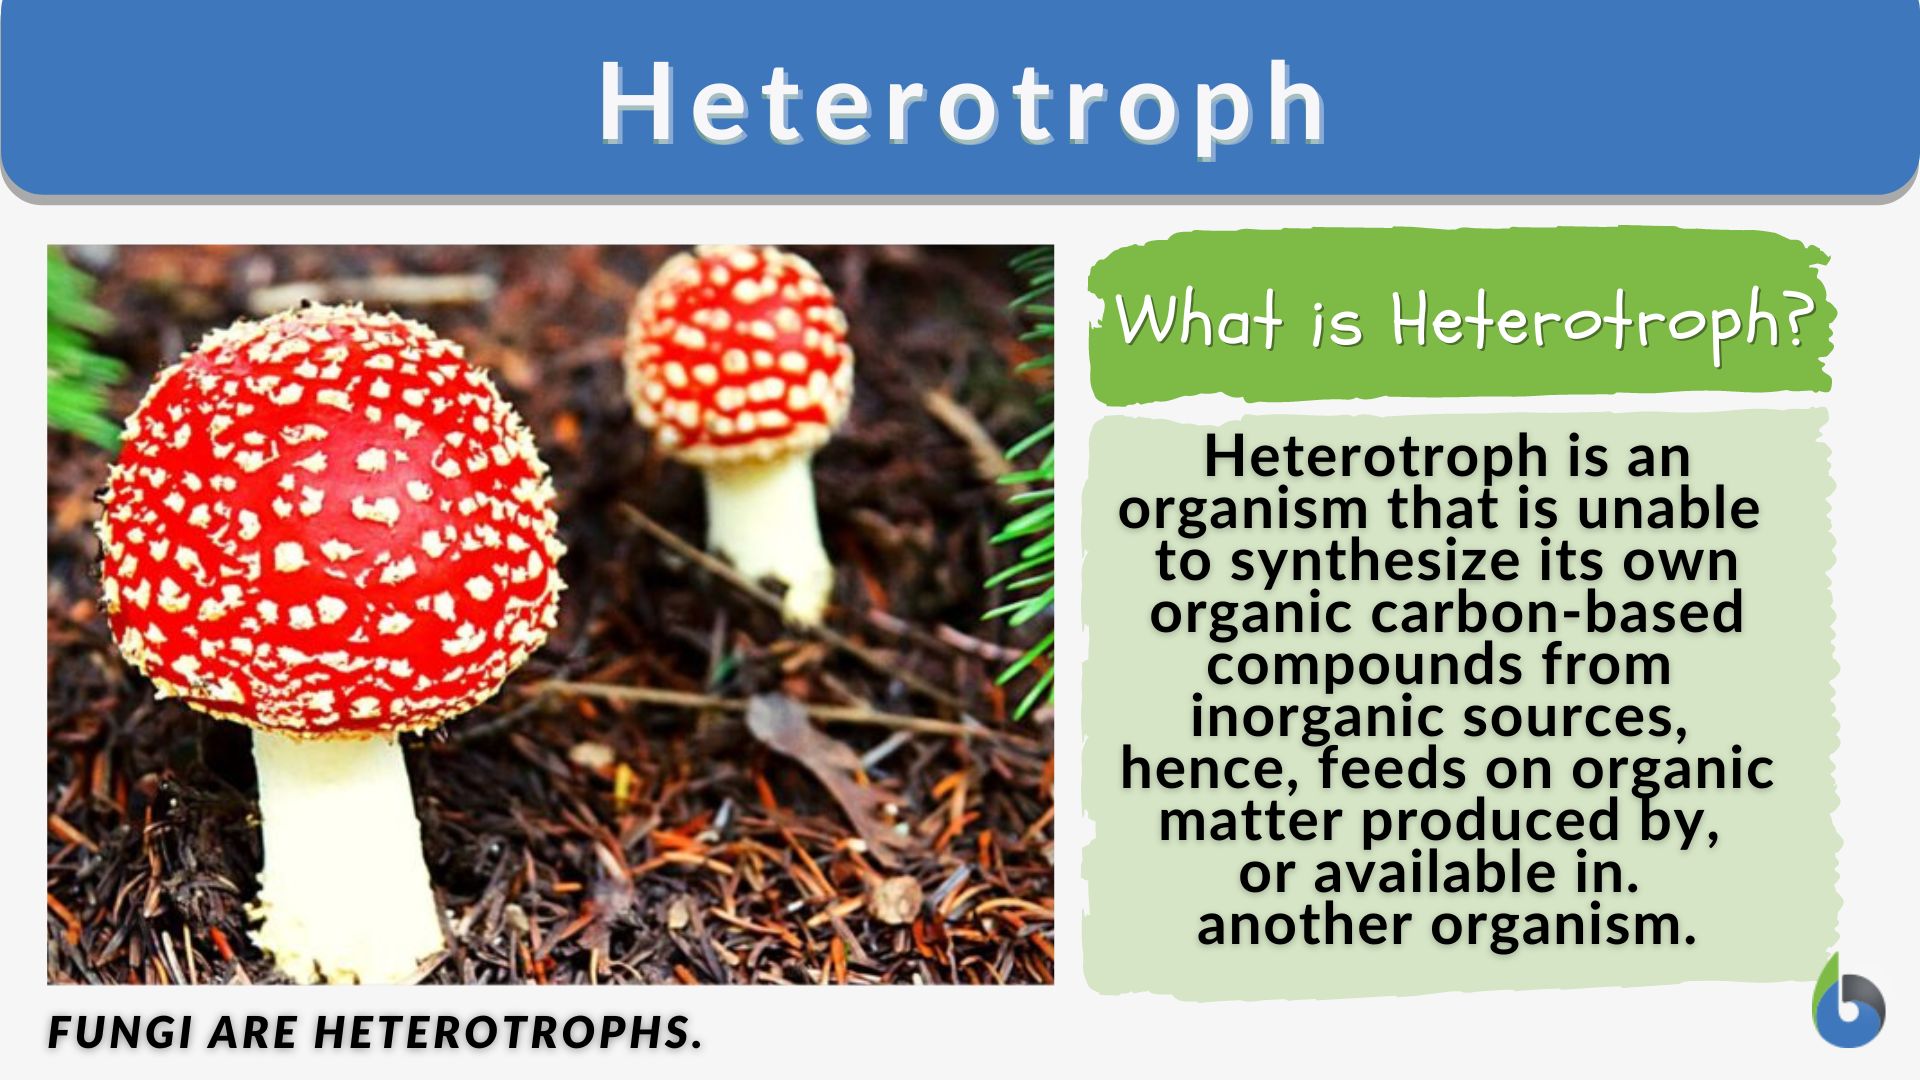 Heterotroph - Definition and Examples - Biology Online Dictionary